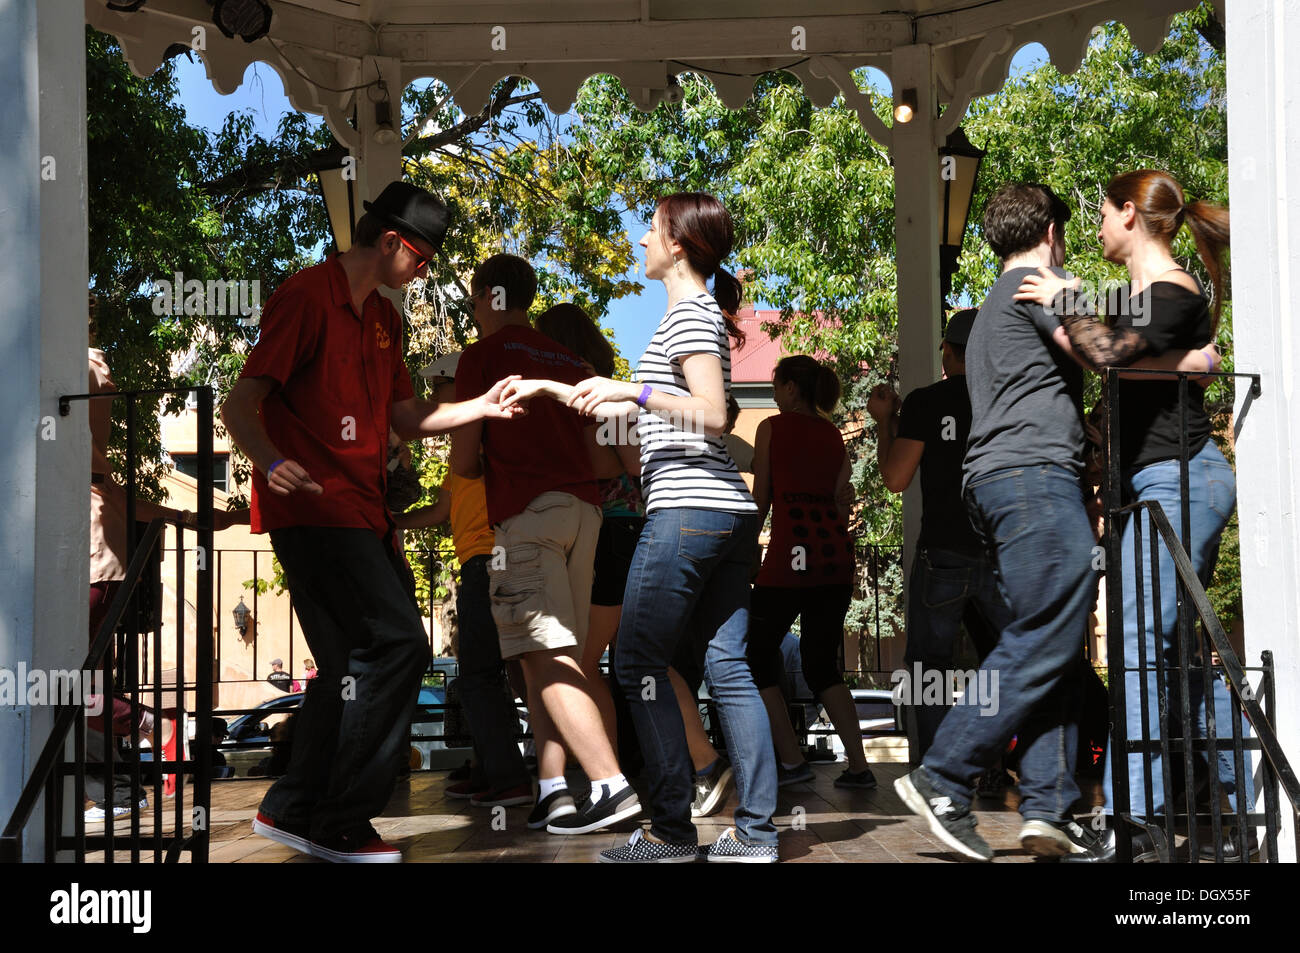 Youth dancing in the gazebo in Old Town's Main Plaza, Albuquerque, New Mexico, USA Stock Photo